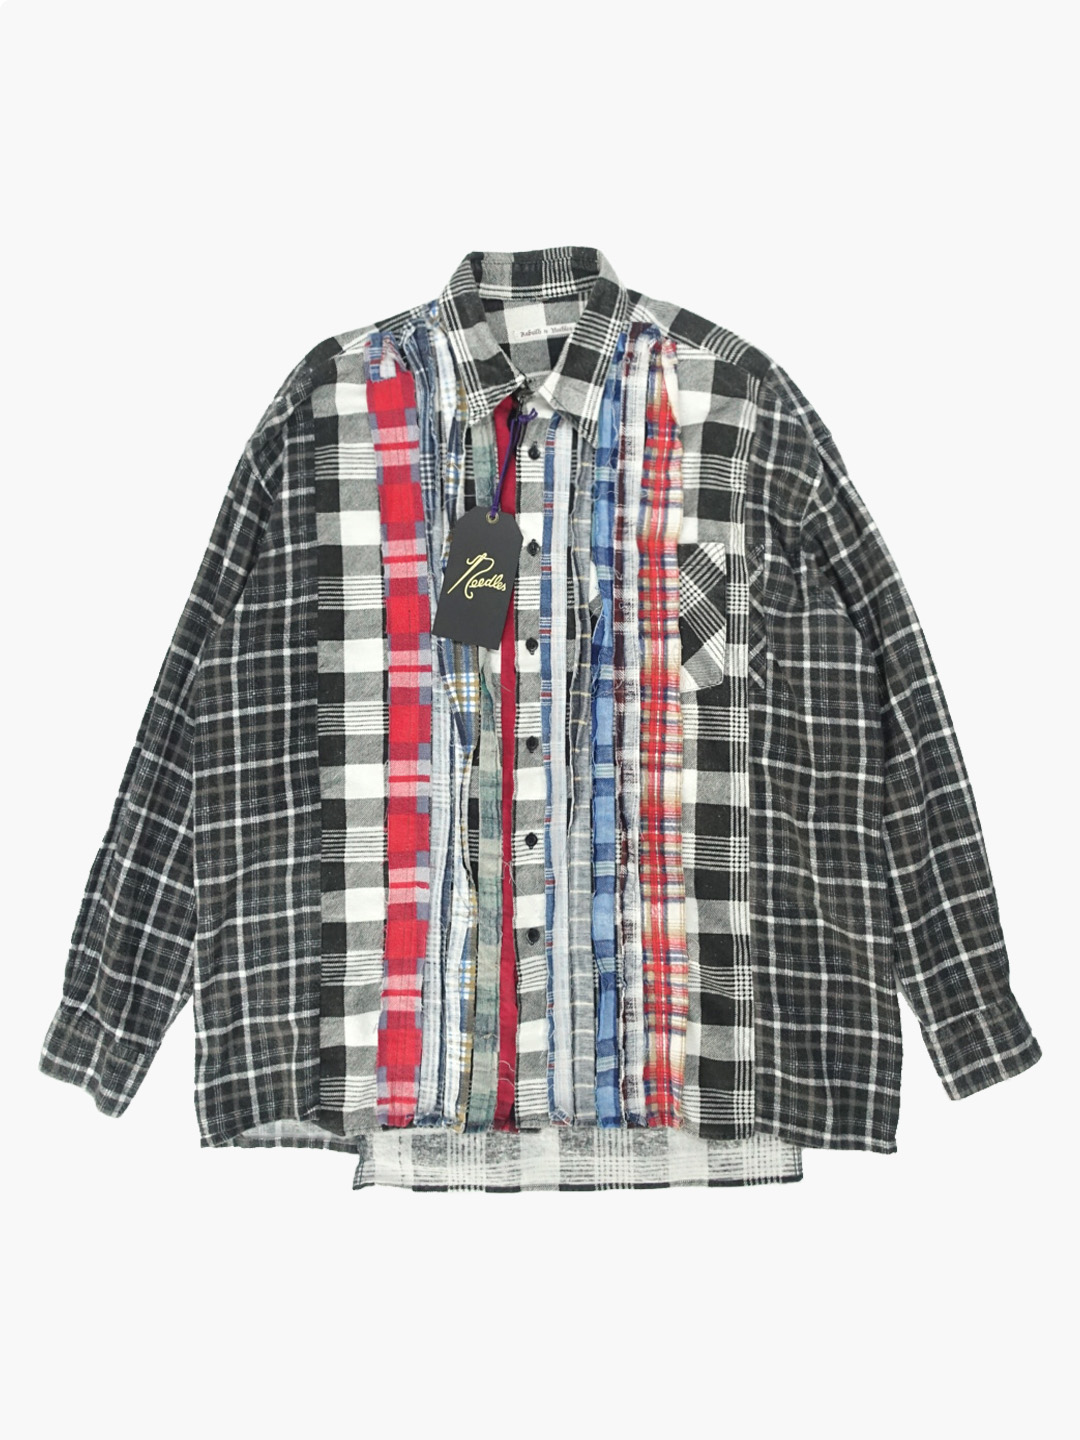 REBUILD BY NEEDLESFlannel shirt